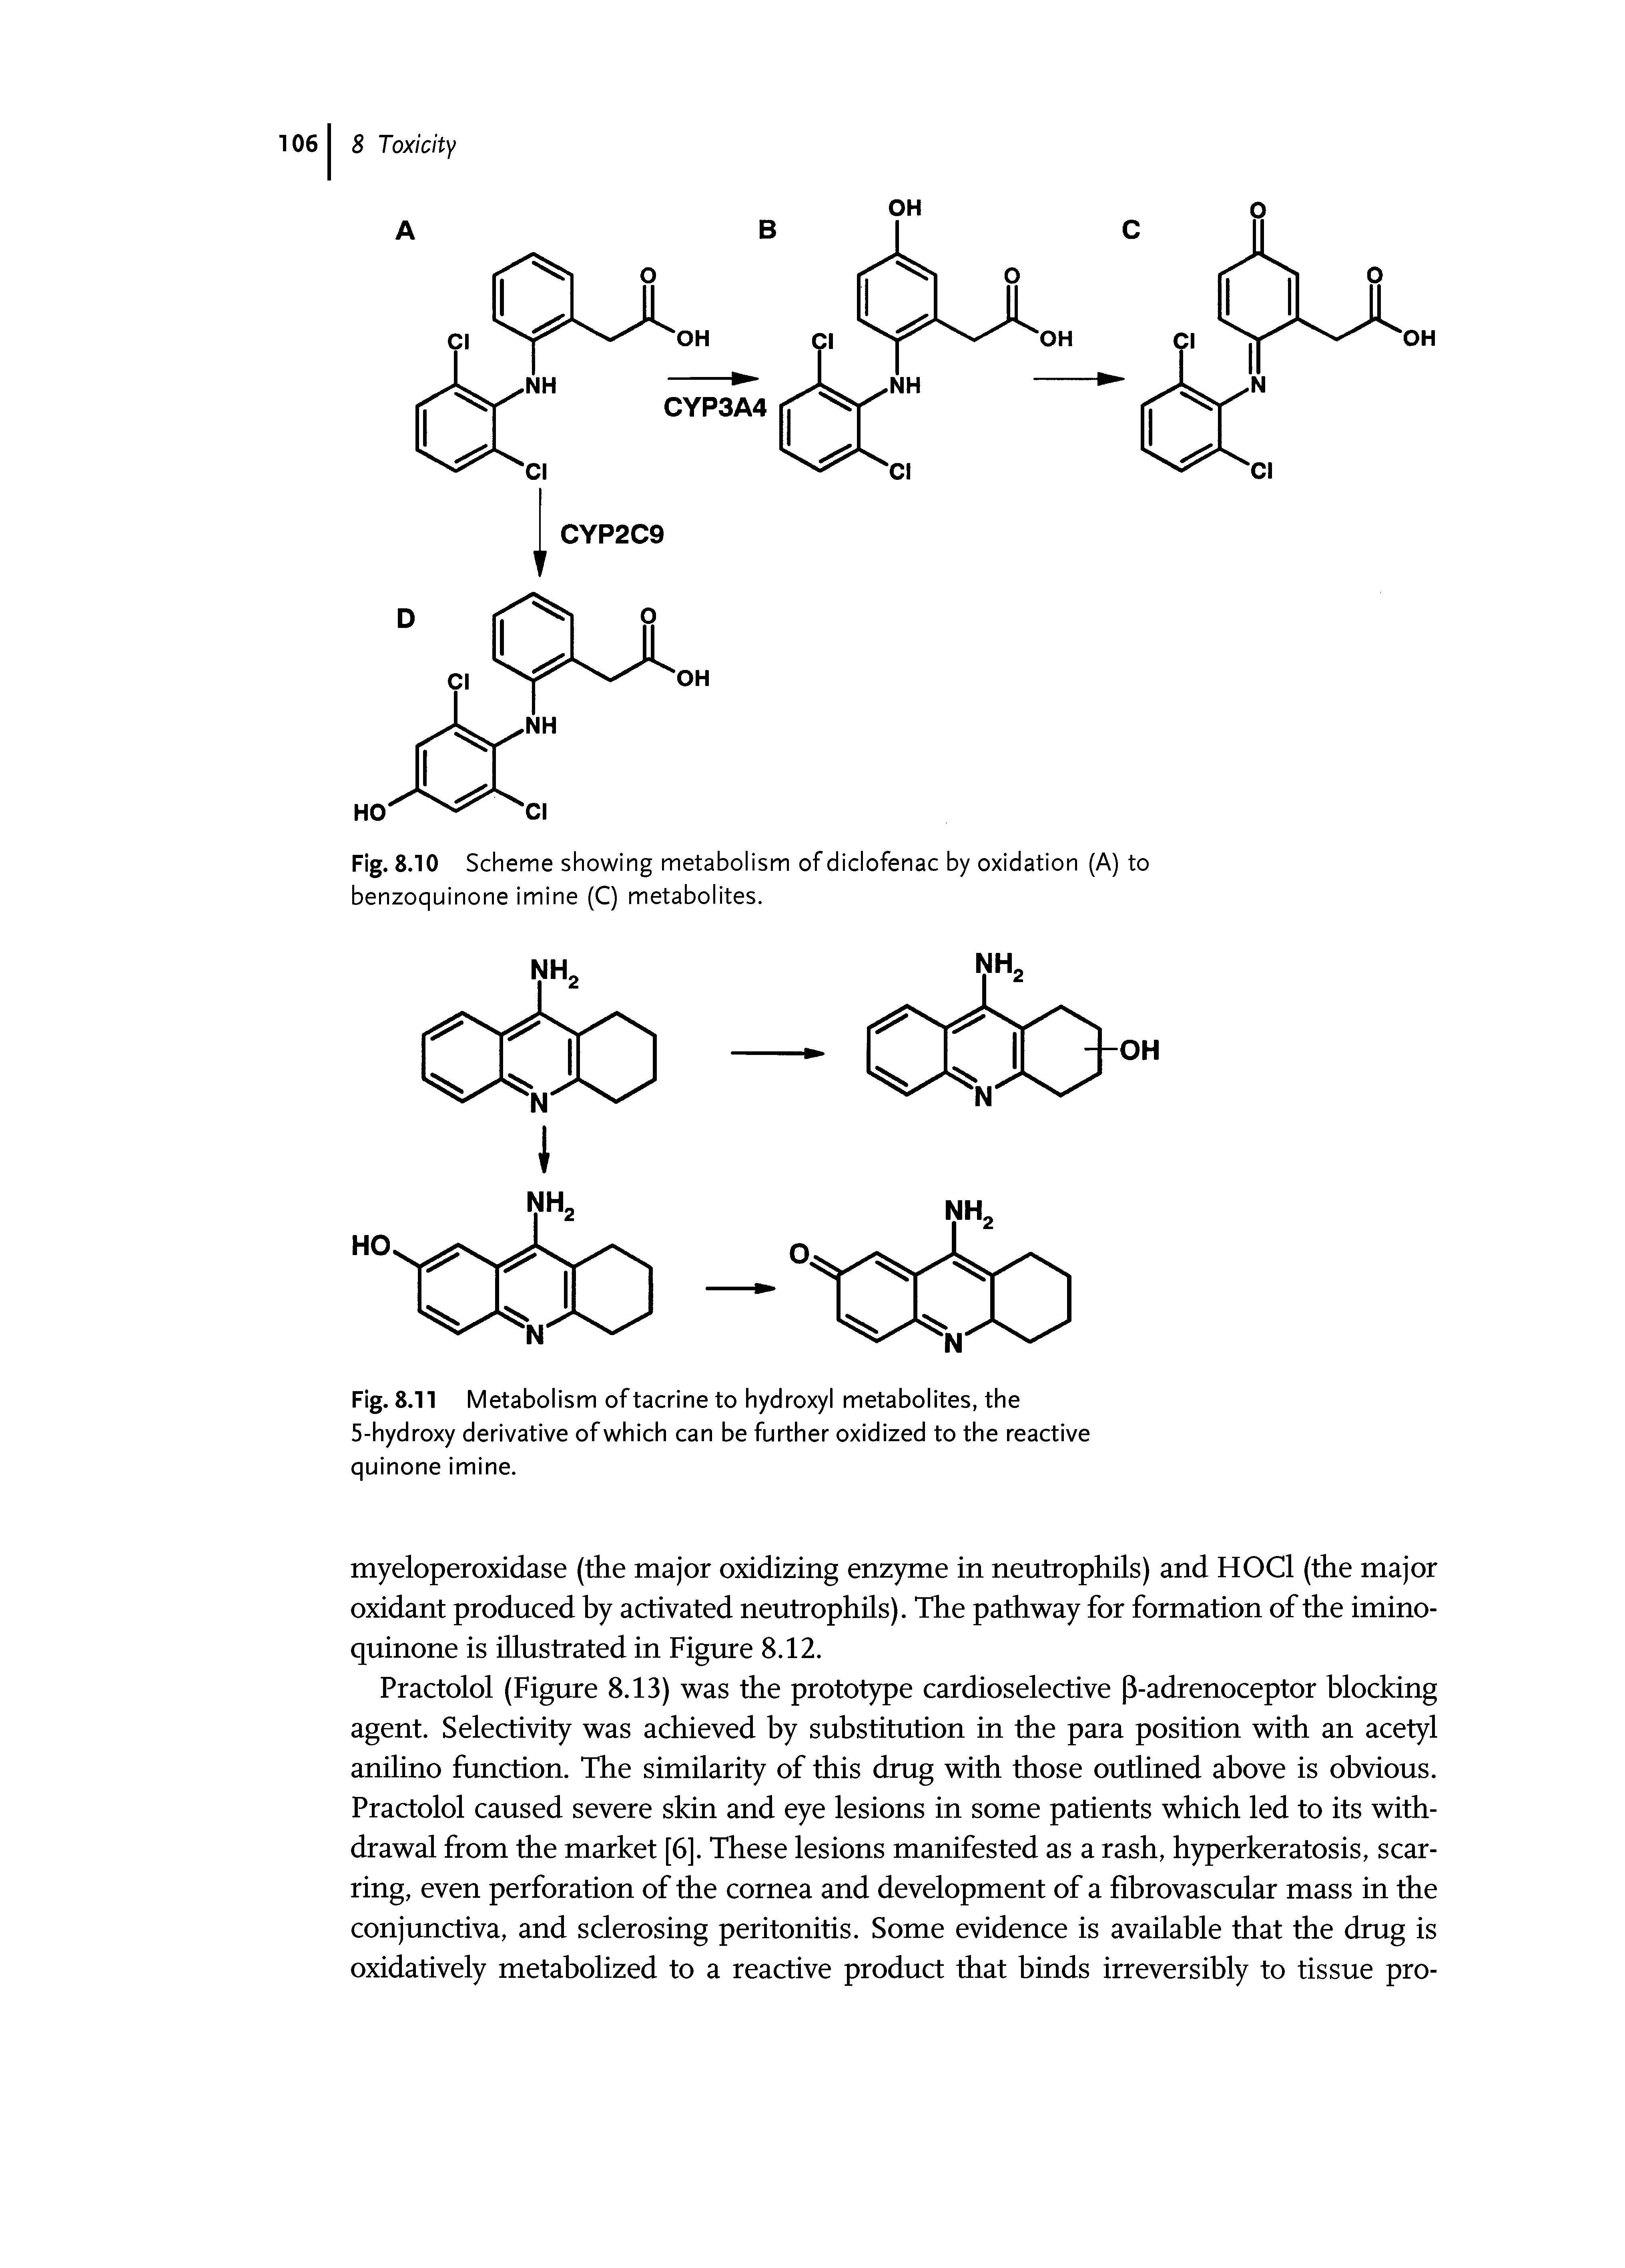 Fig. 8.11 Metabolism of tacrine to hydroxyl metabolites, the 5-hydroxy derivative of which can be further oxidized to the reactive quinone imine.